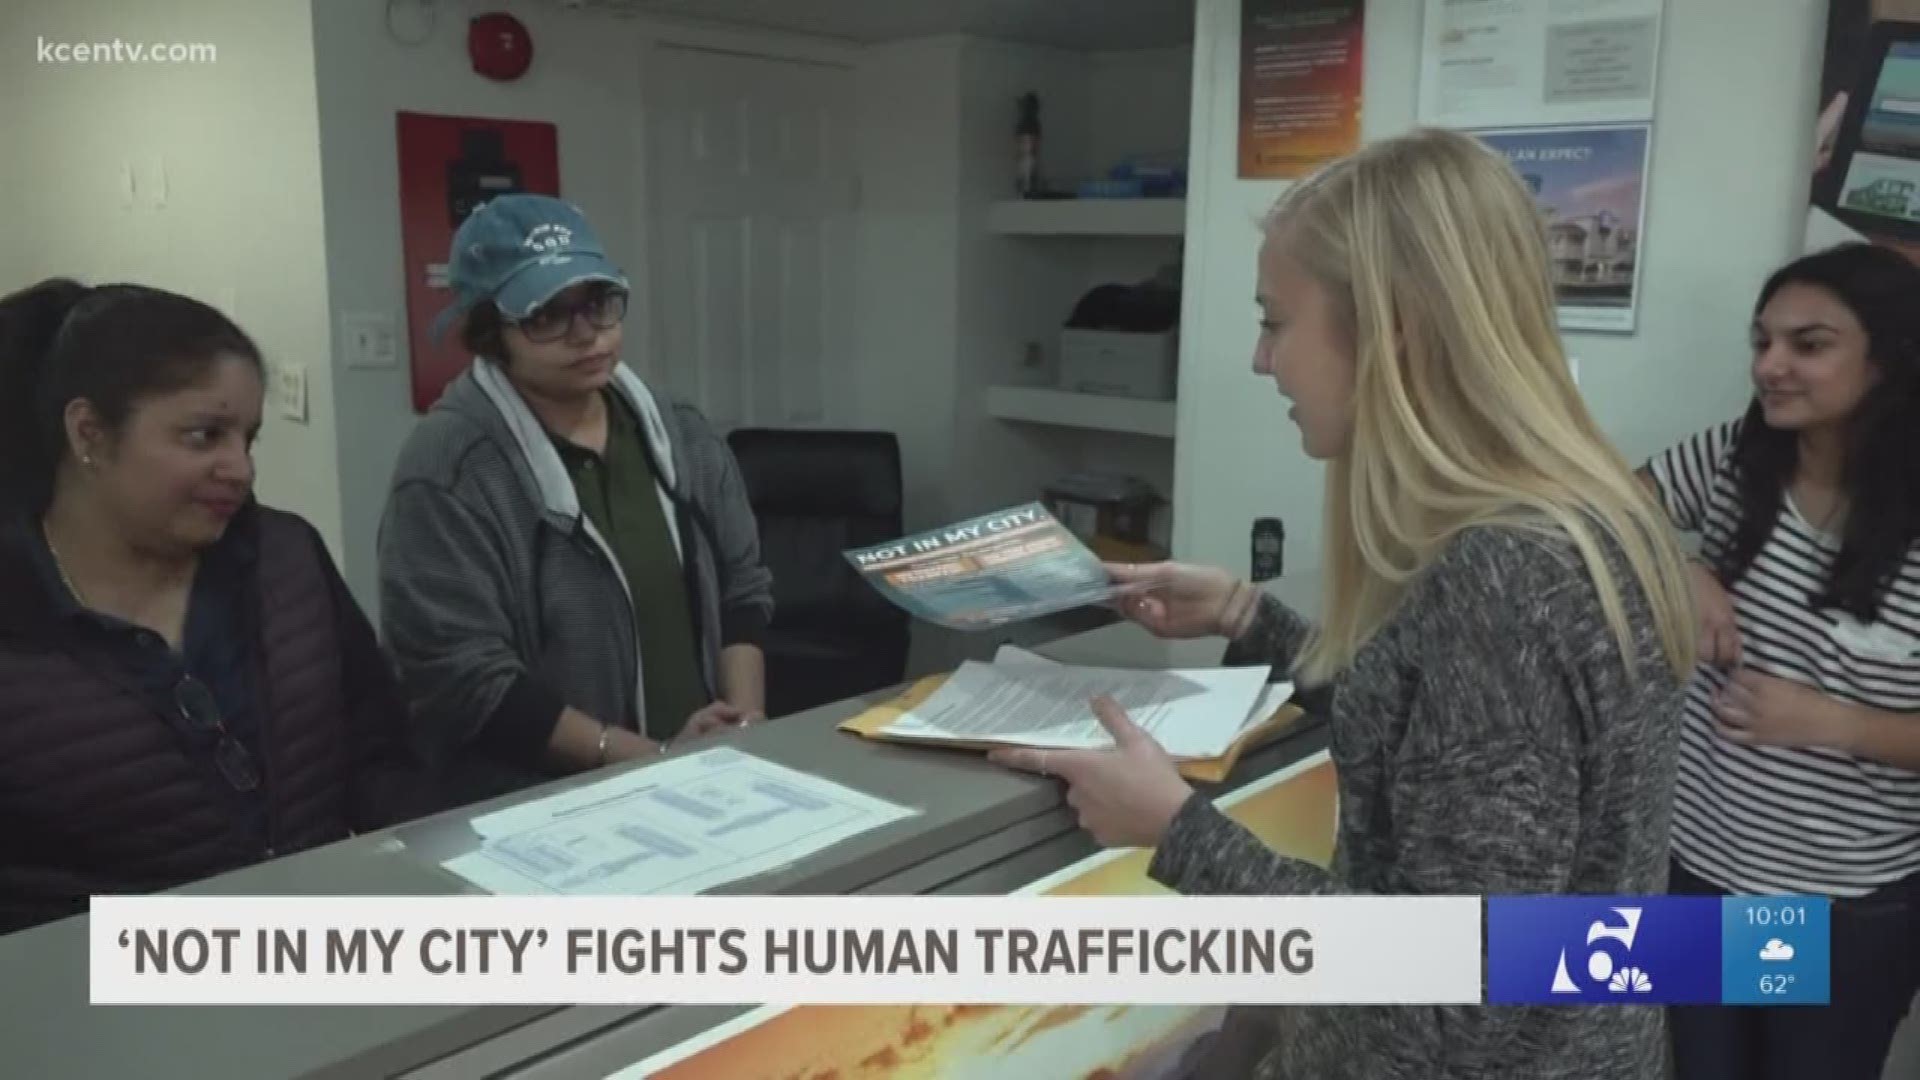 Volunteers across central Texas spent several hours engaging the community about human trafficking Saturday in the 'Not In My City' Campaign.